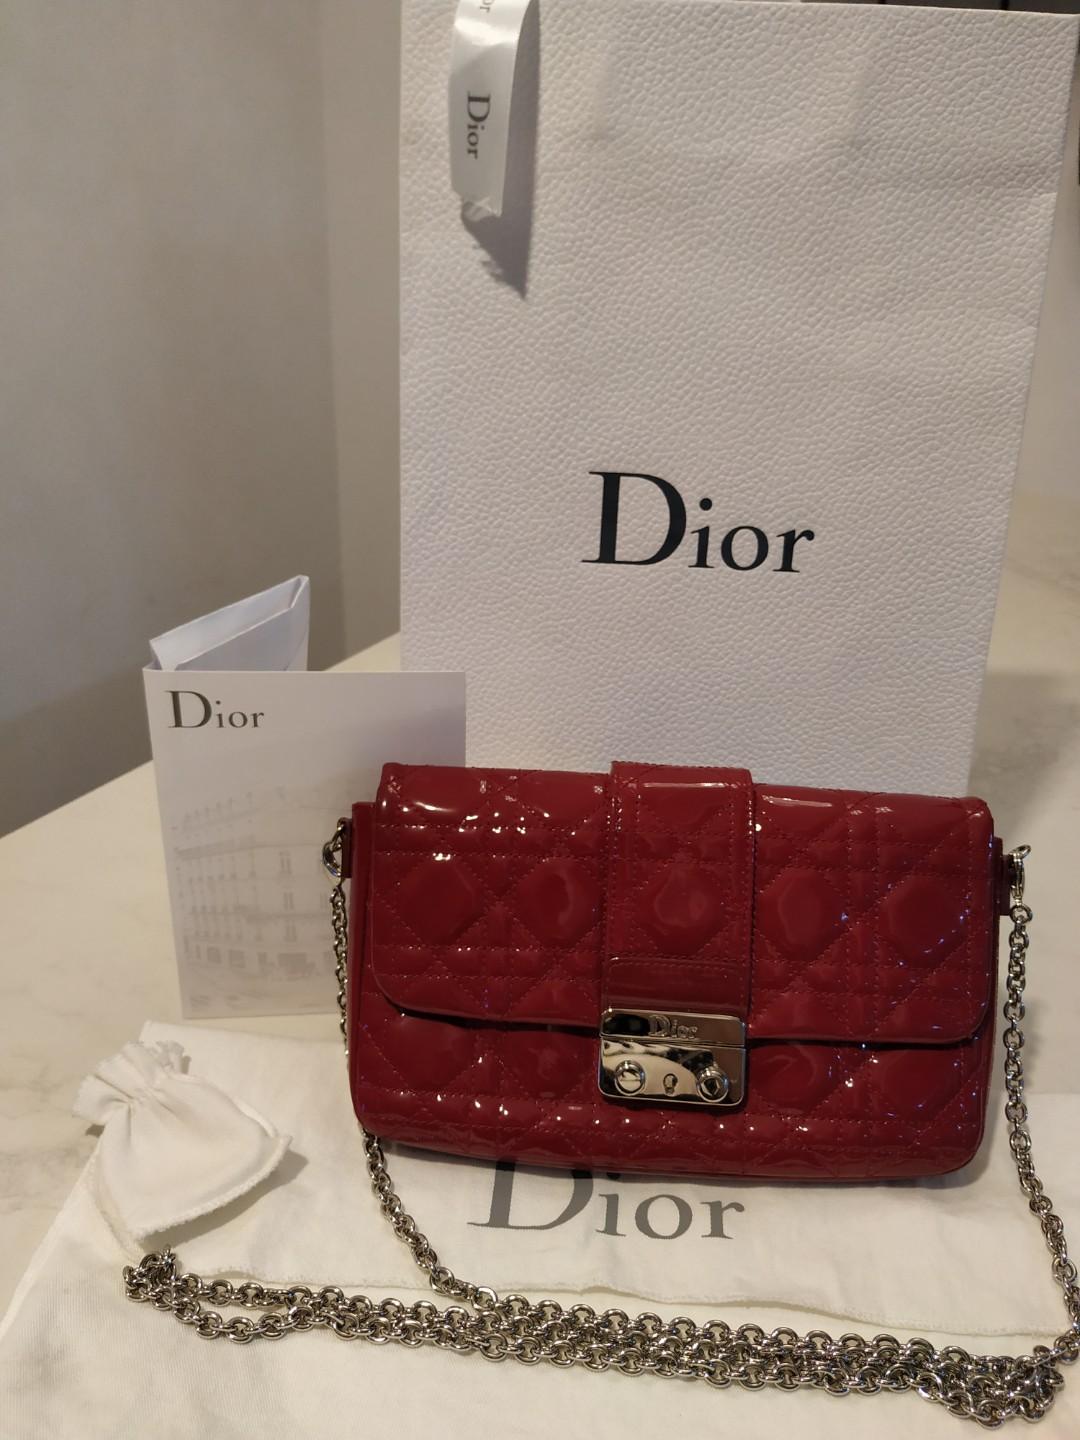 Inspired By The Classic 1947 New Look Bag The Dior New Lock Pouch   Bragmybag